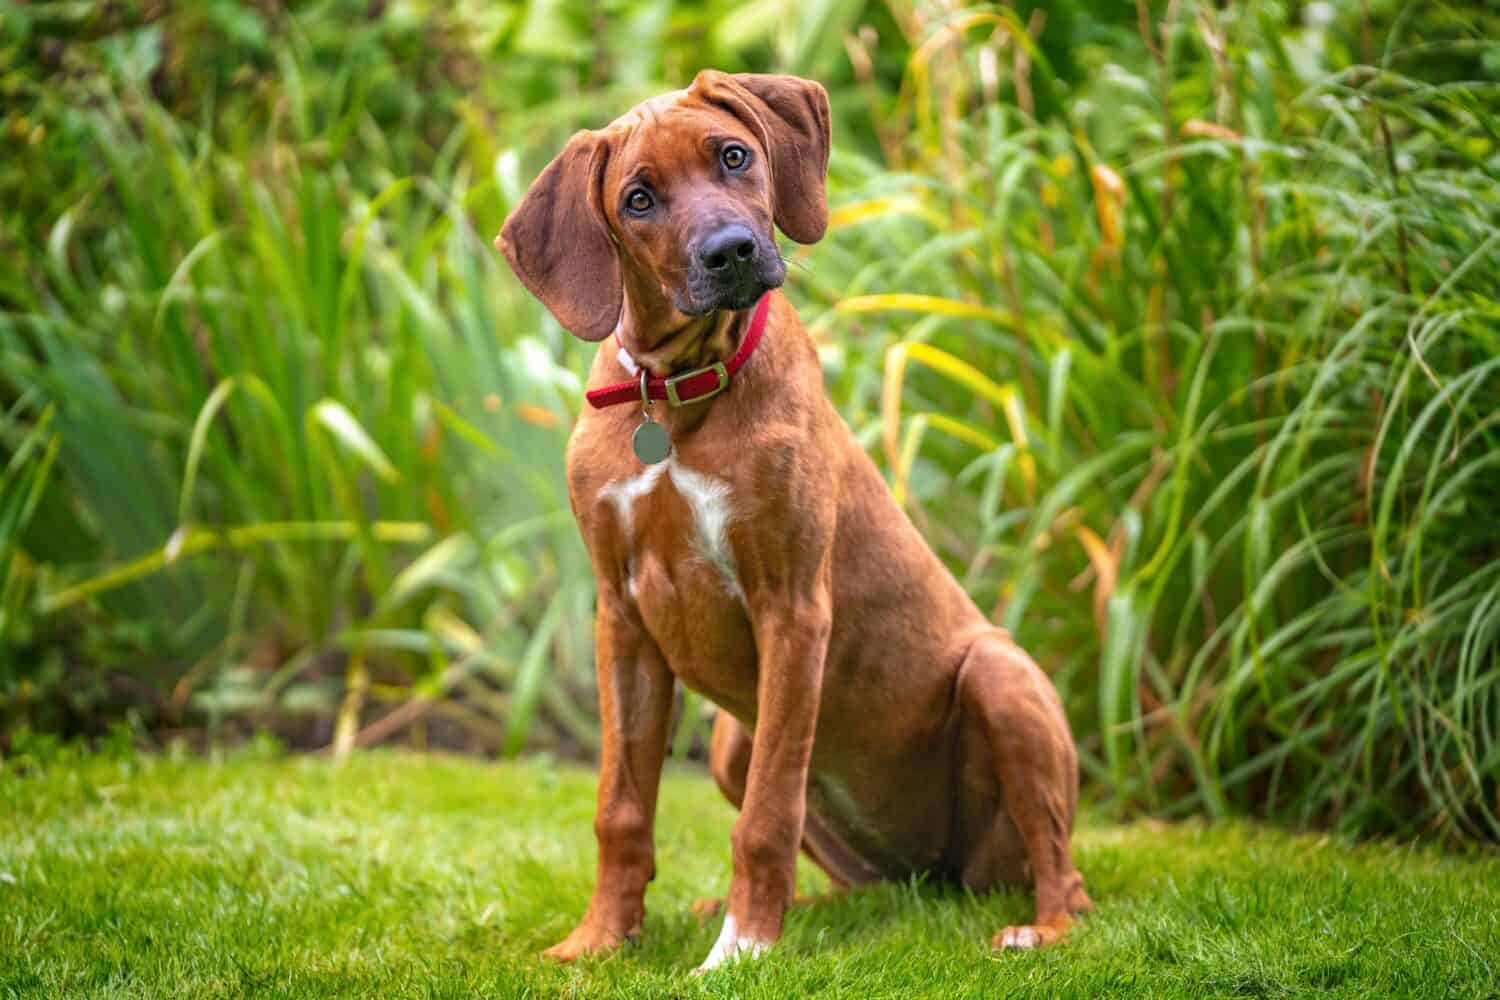 Six month old Rhodesian Ridegback puppy with a head tilt looking at the camera, fawn in colour. super cute.